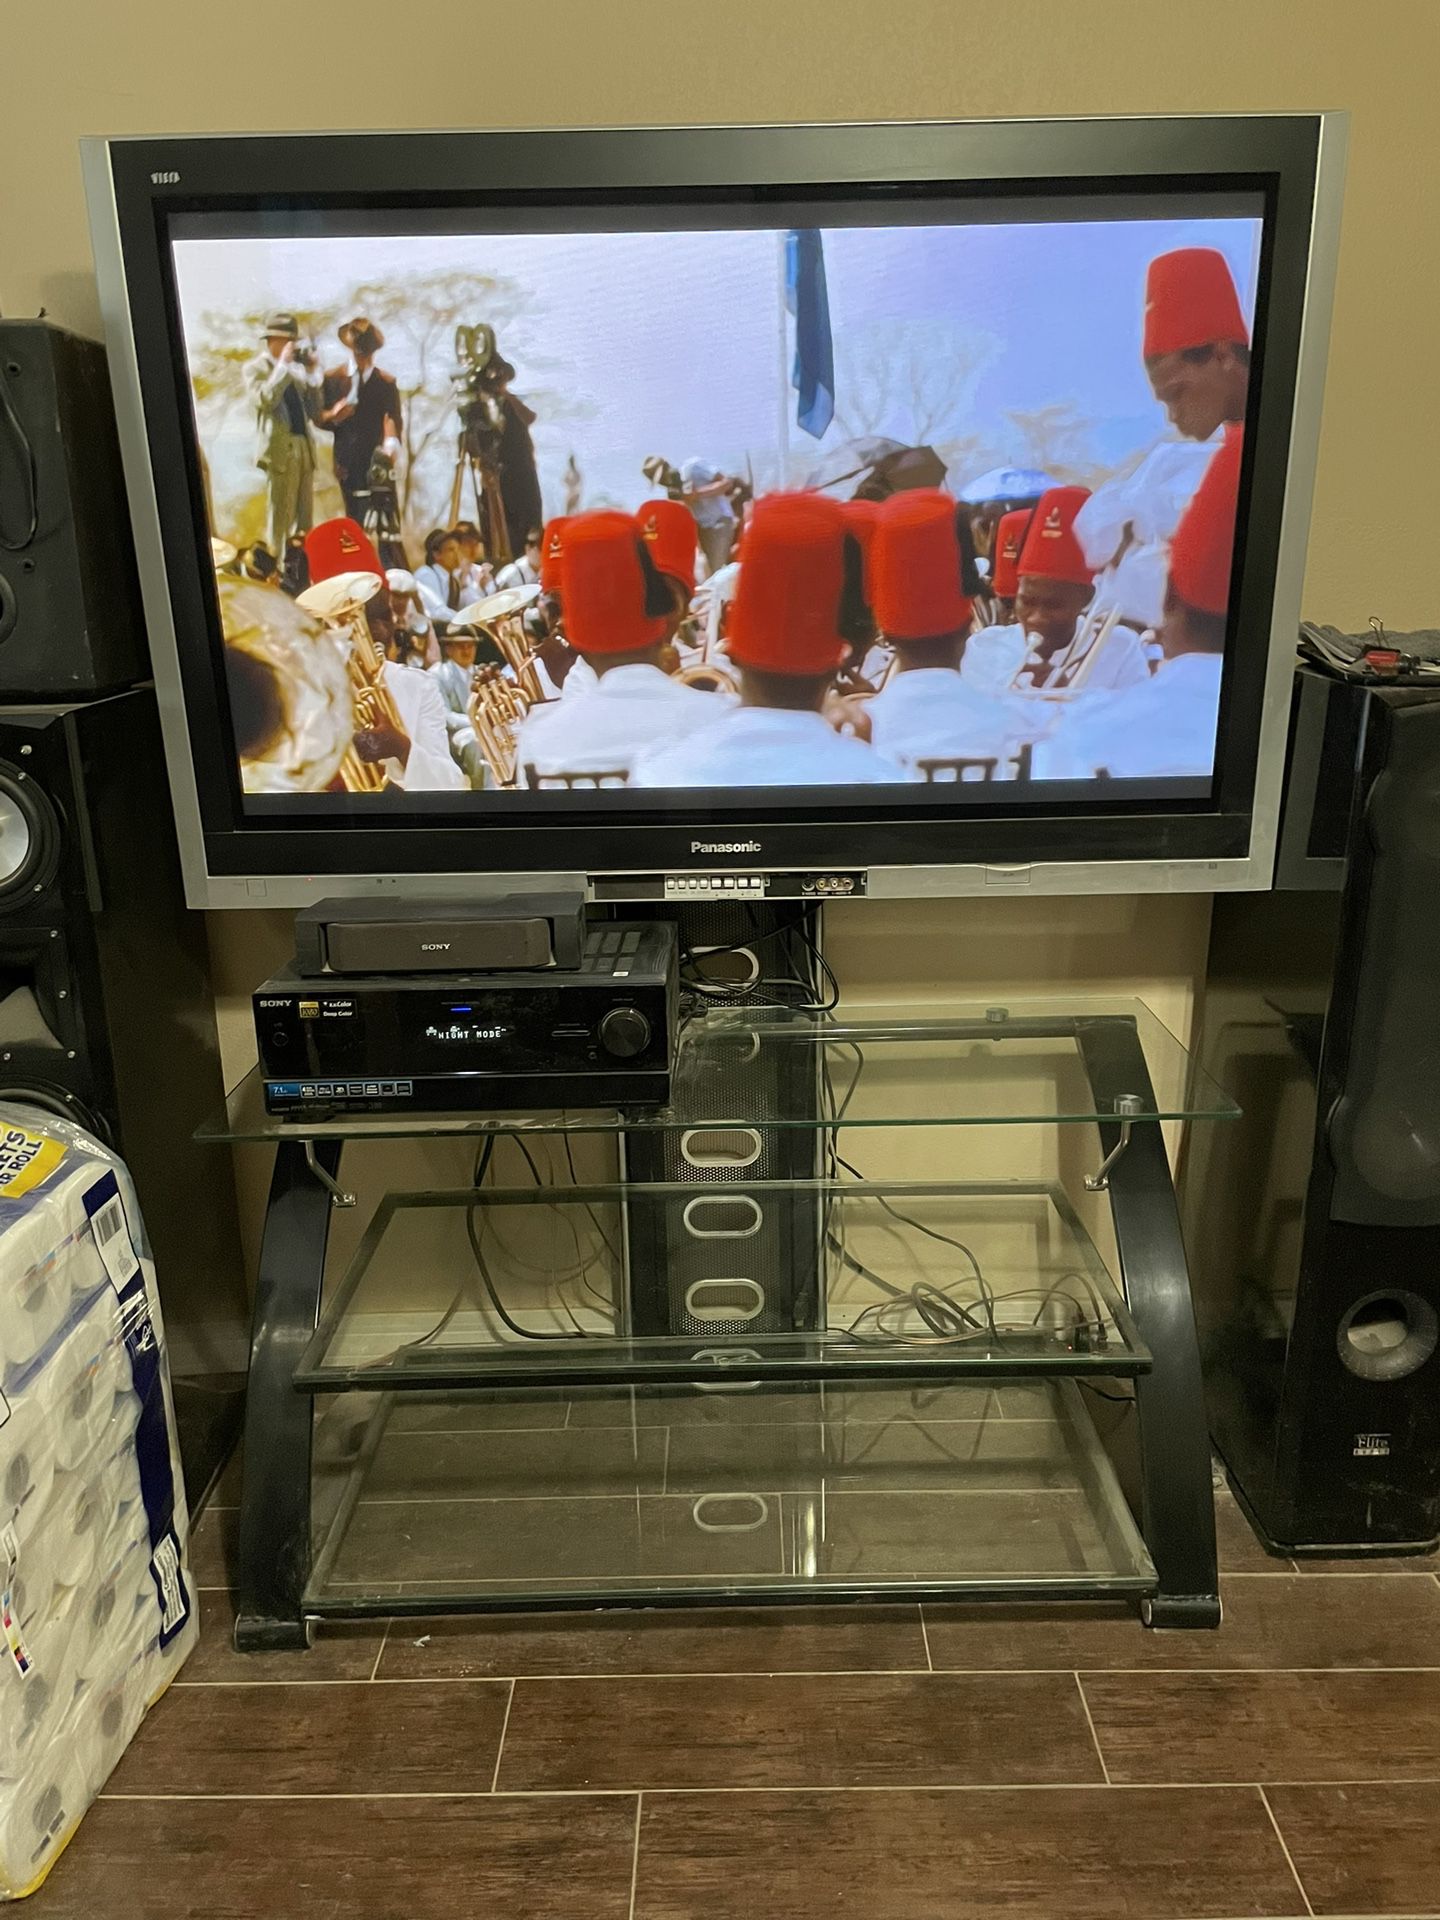 55” Panasonic Plasma TV With Remote (Stand Not Included)